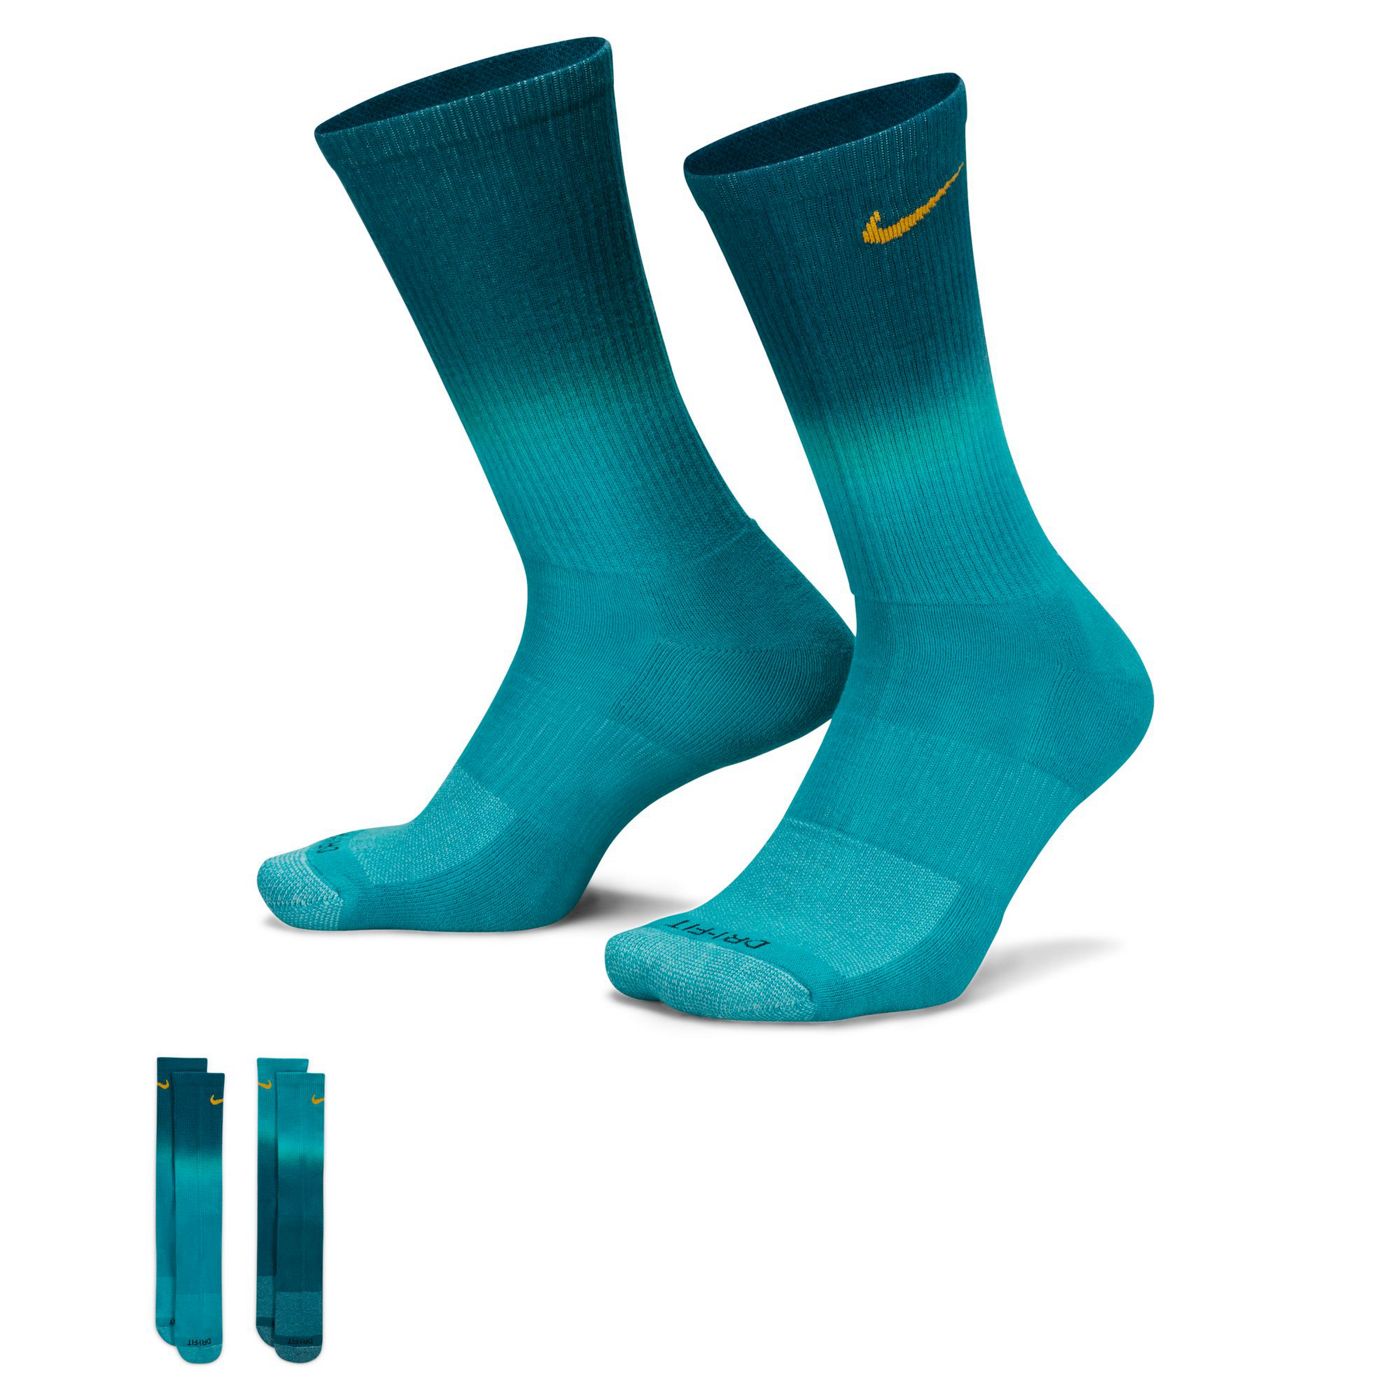 Nike Everyday Plus 2 pack socks in blue ombre